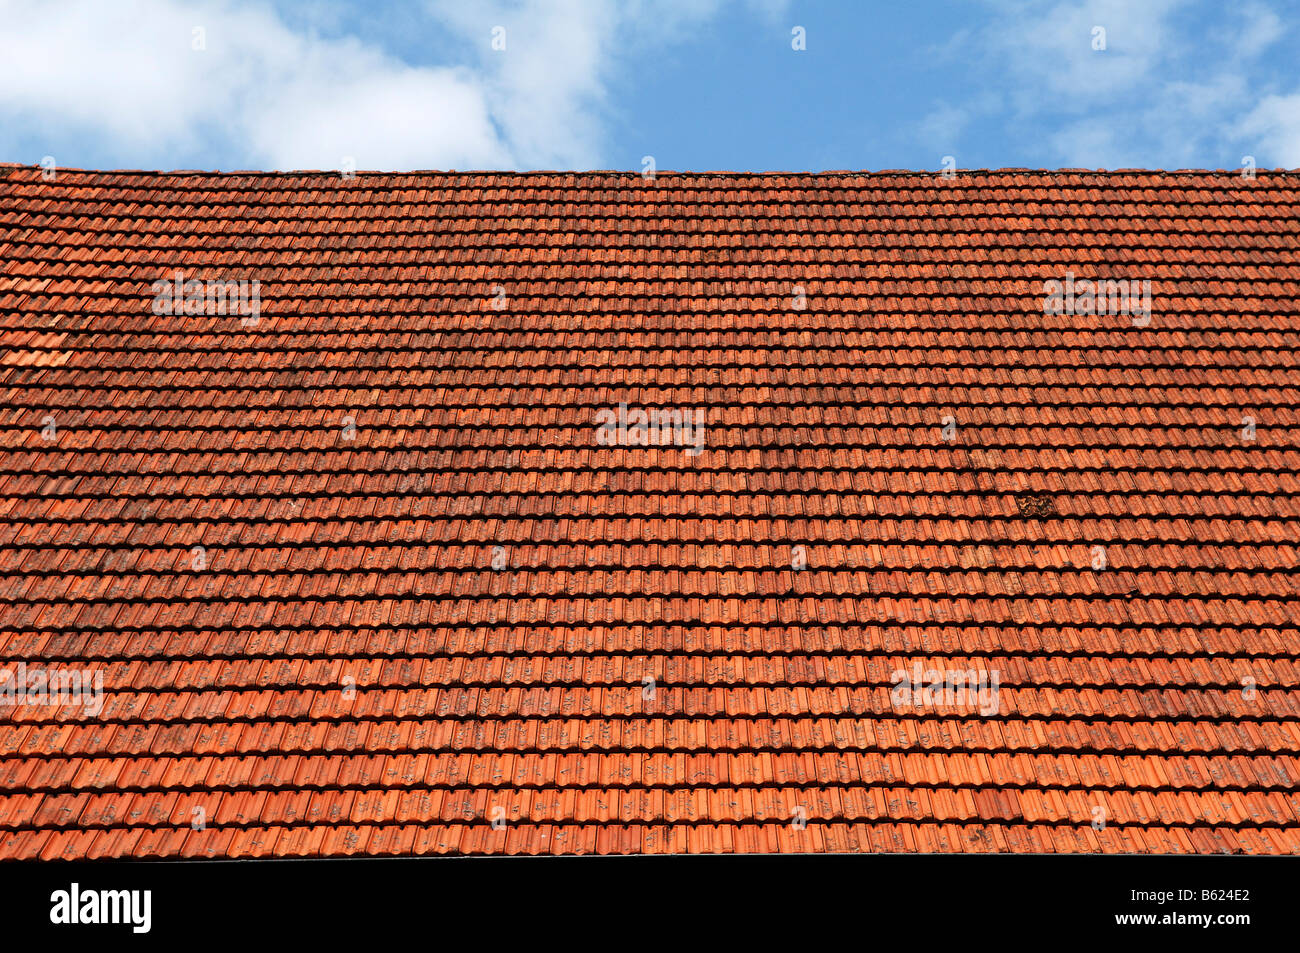 Roof of a cow barn, Igensdorf, Middle Franconia, Bavaria, Germany, Europe Stock Photo